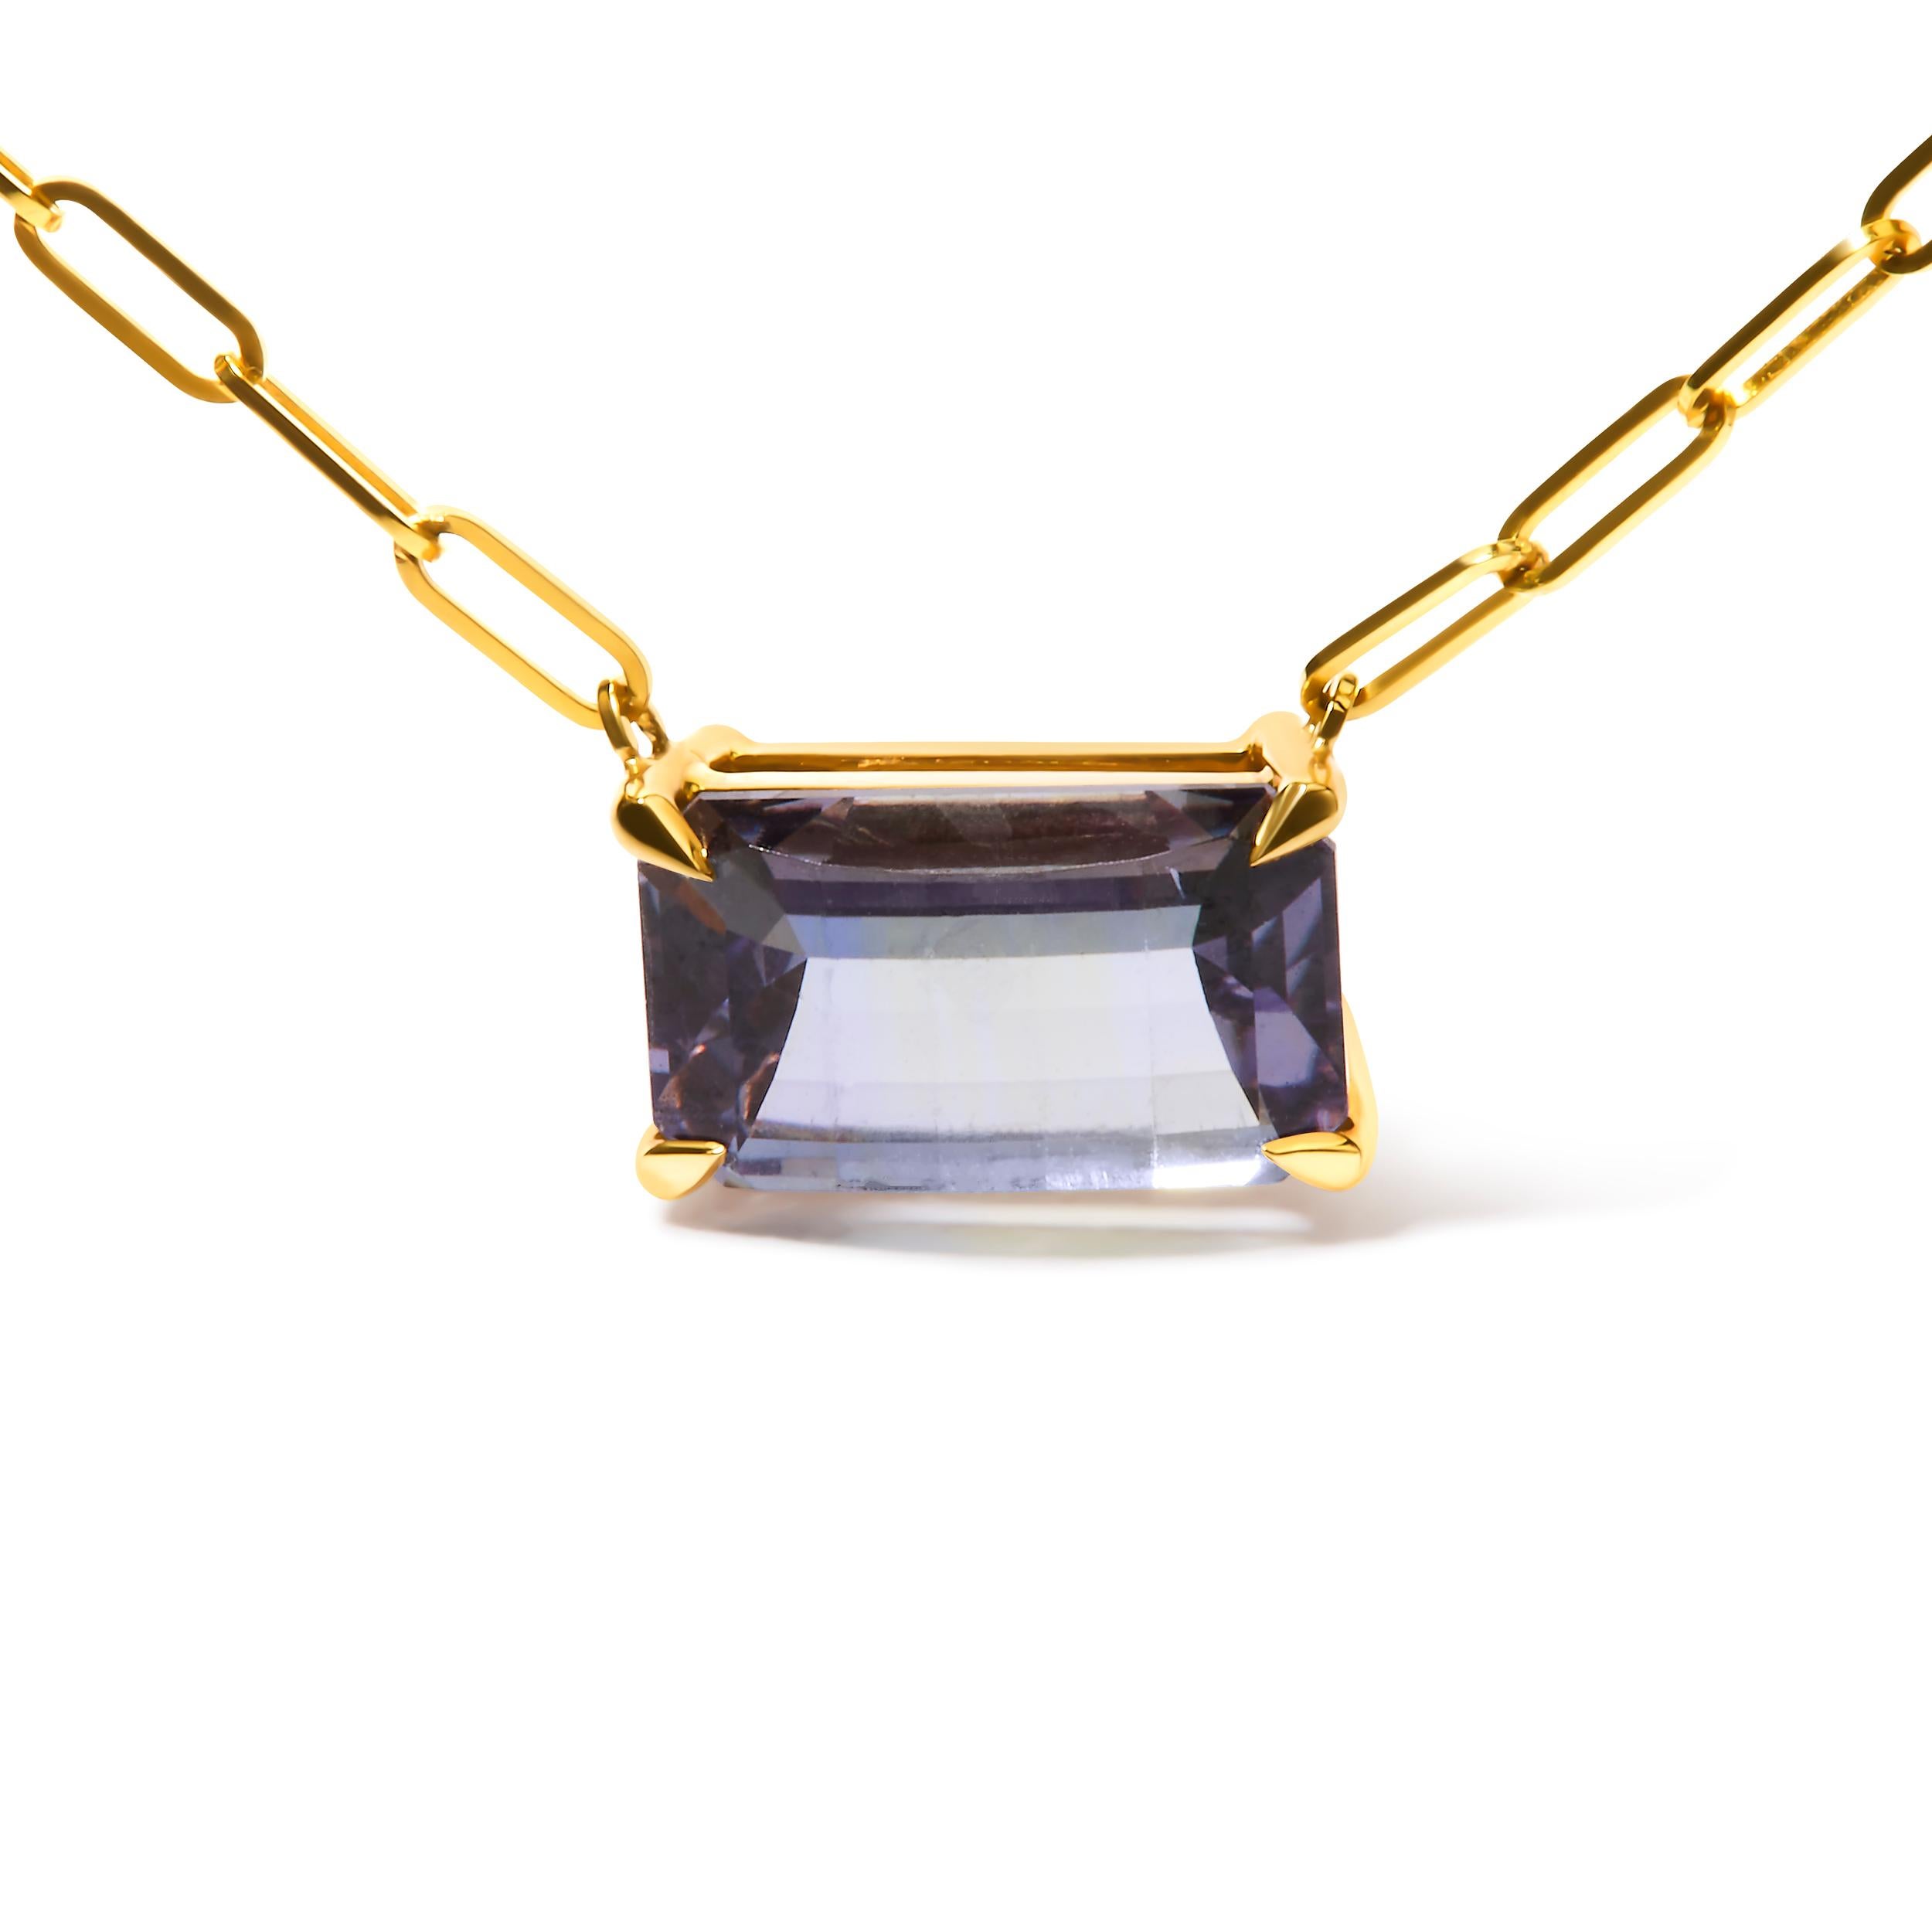 Discover the epitome of elegance with our 14K Yellow Gold Natural Pixel Cut Emerald Bicolor Tanzanite Pendant Necklace, a true masterpiece of nature's beauty. Crafted from luxurious 14K yellow gold, this necklace features a breathtaking 2 7/8 cttw